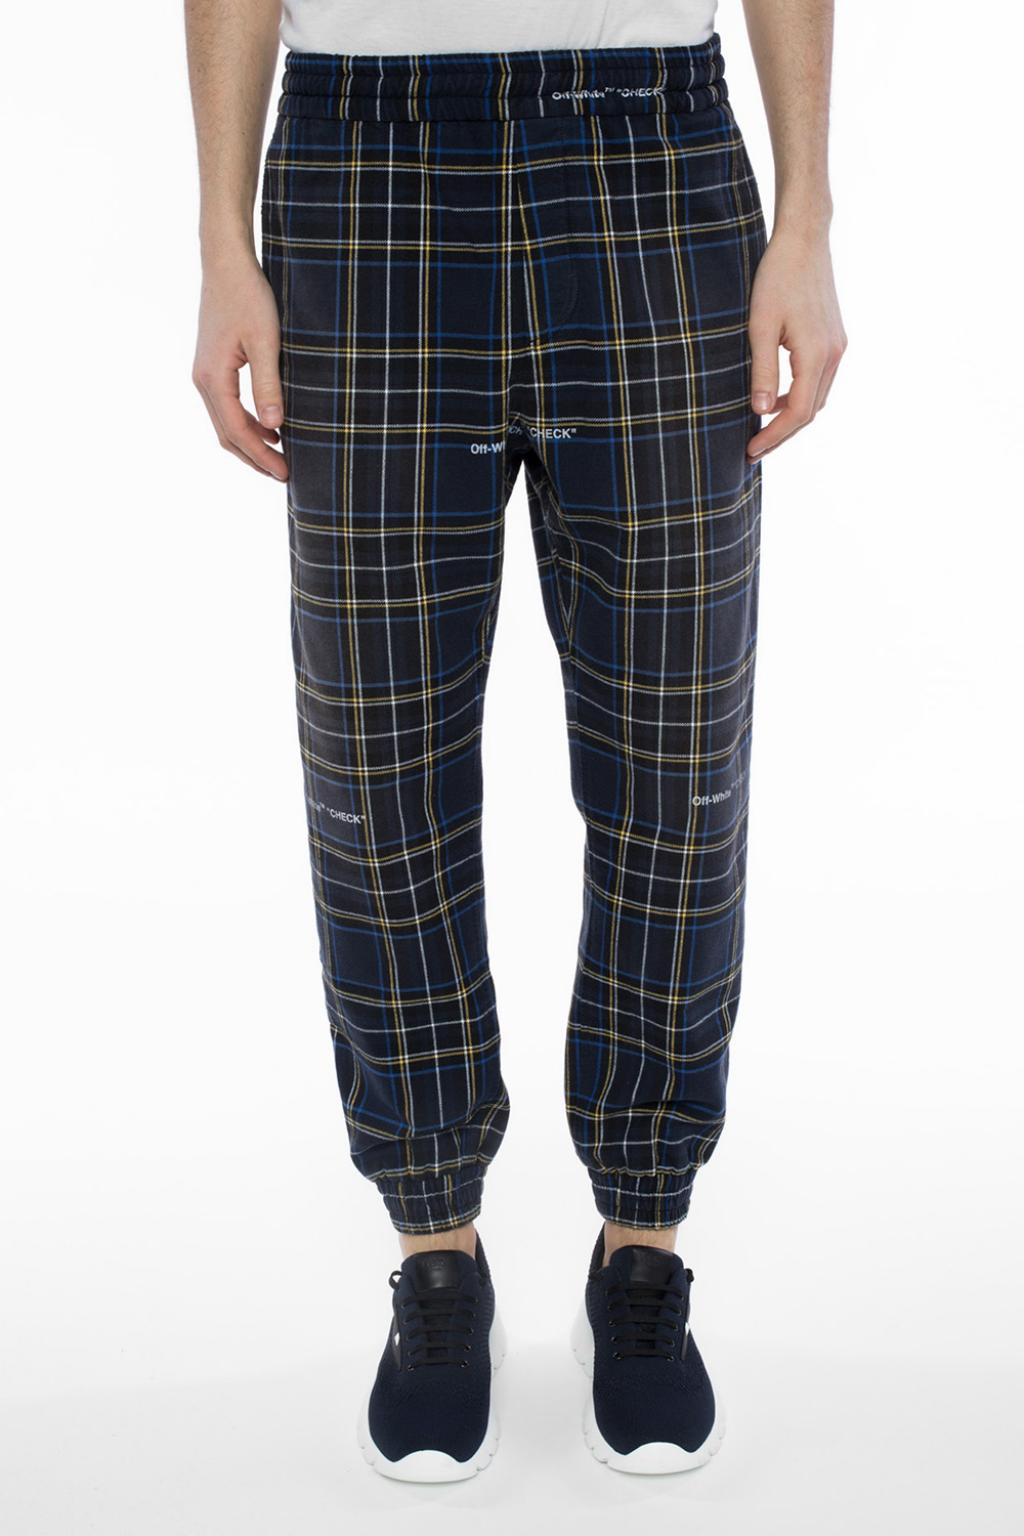 Off-White c/o Virgil Abloh Checked Trousers in Blue for Men | Lyst